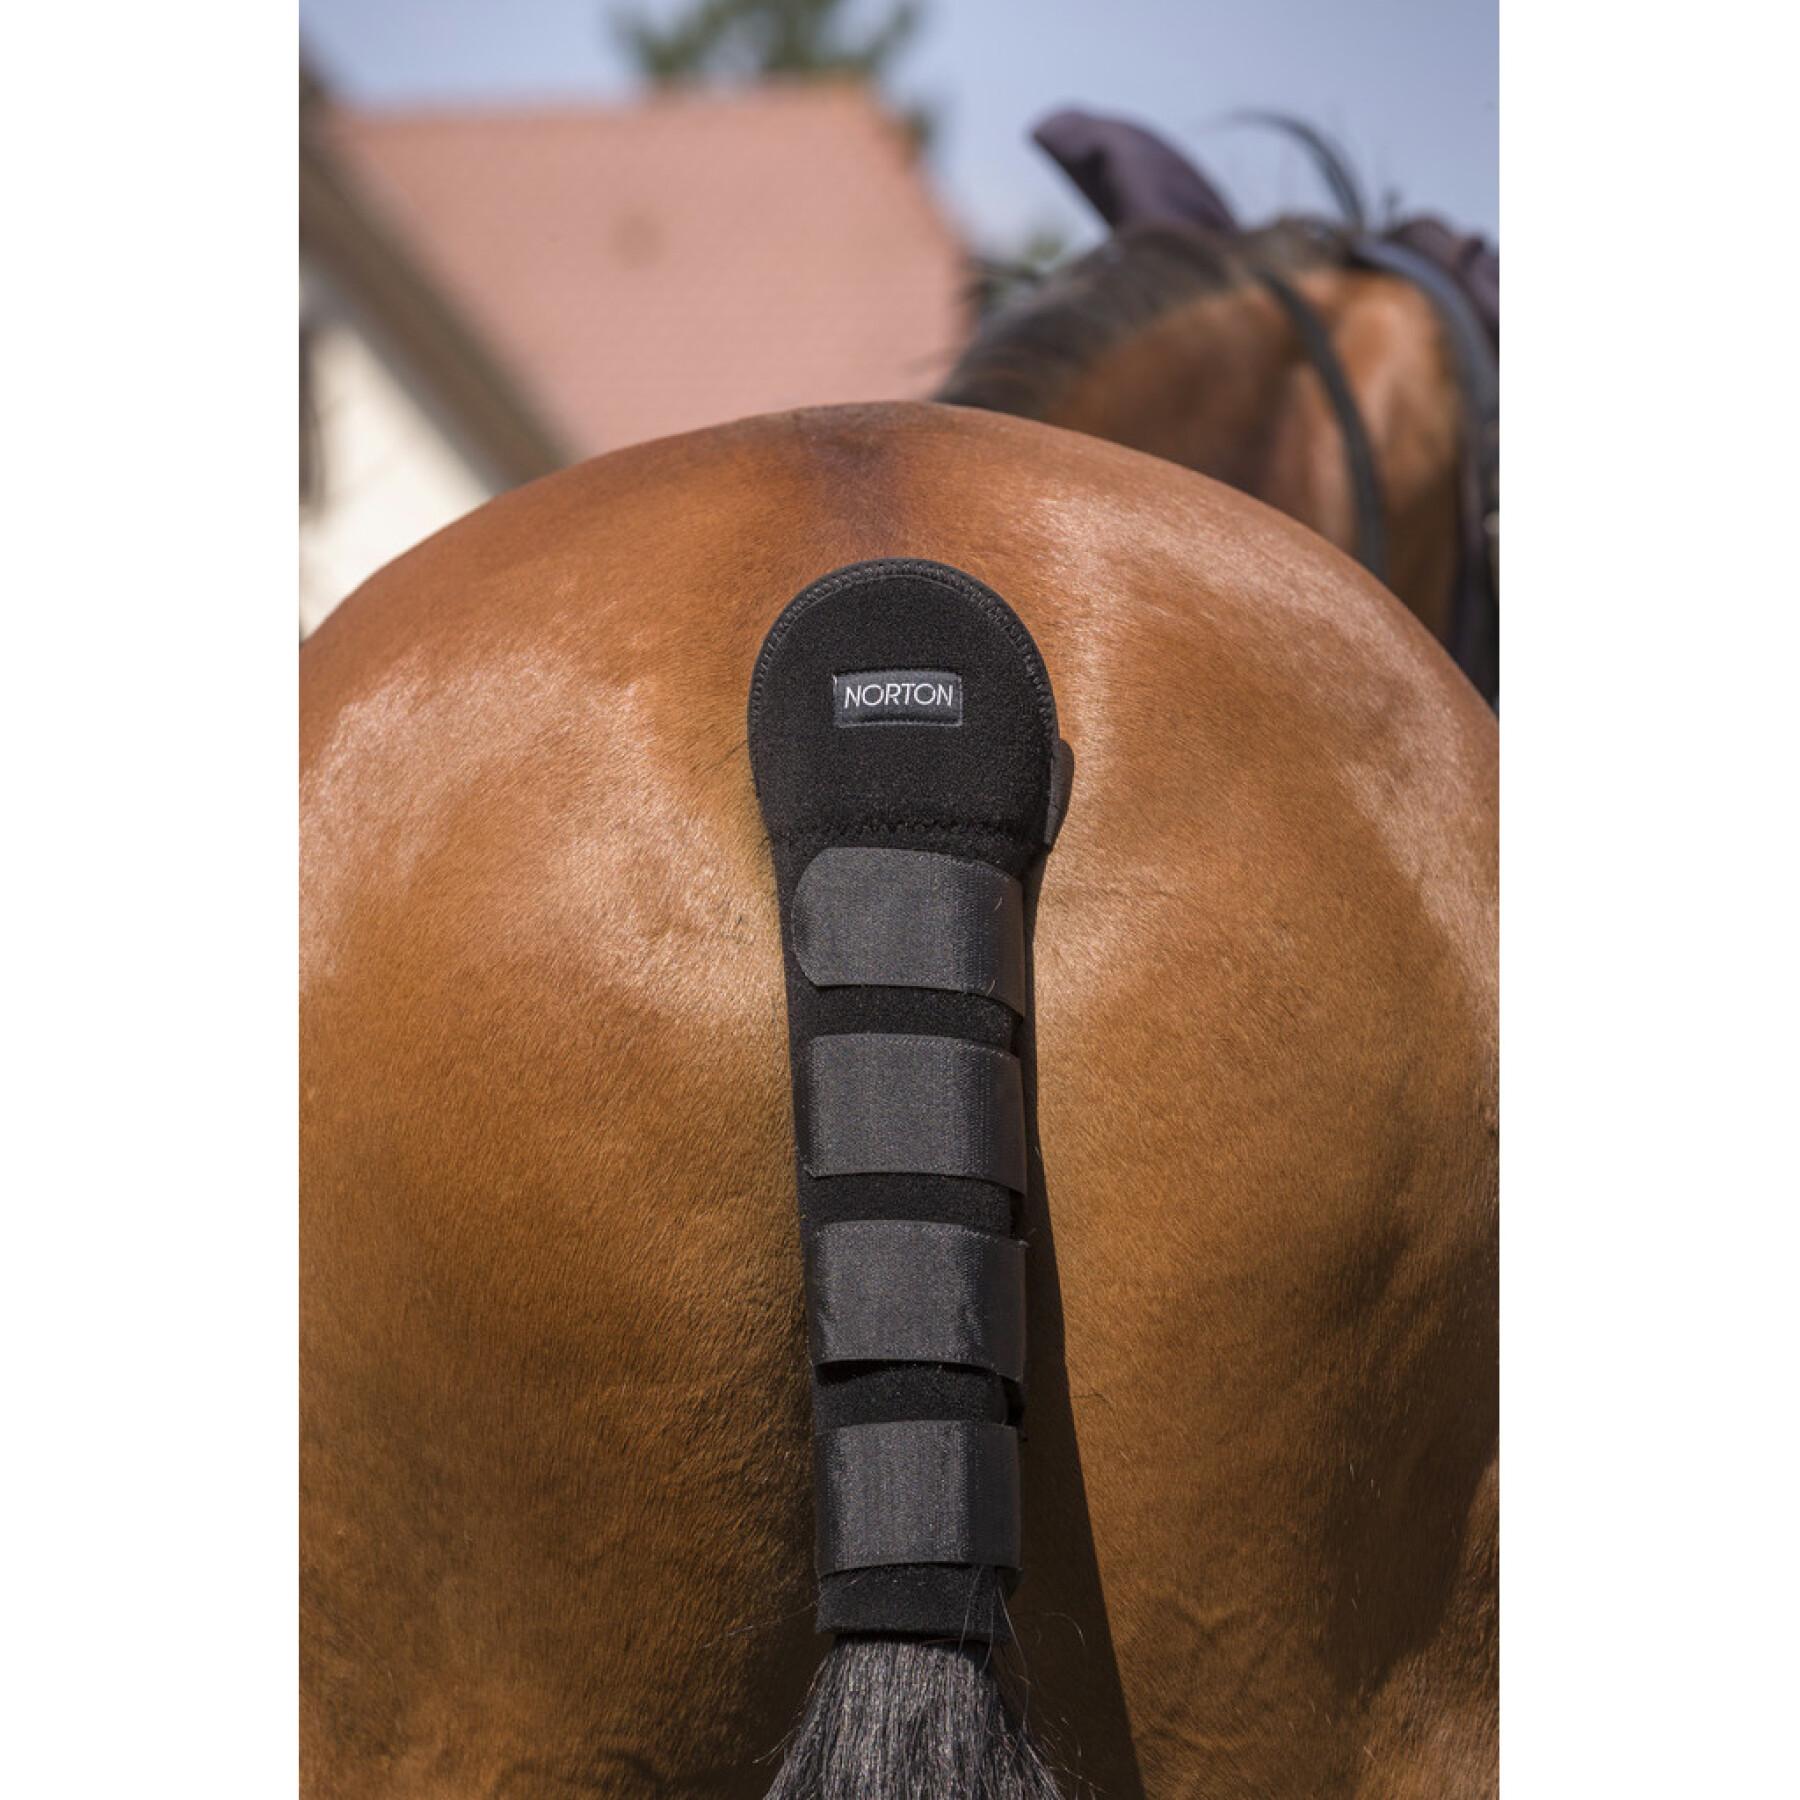 Tail Guard for horses Norton High Protection